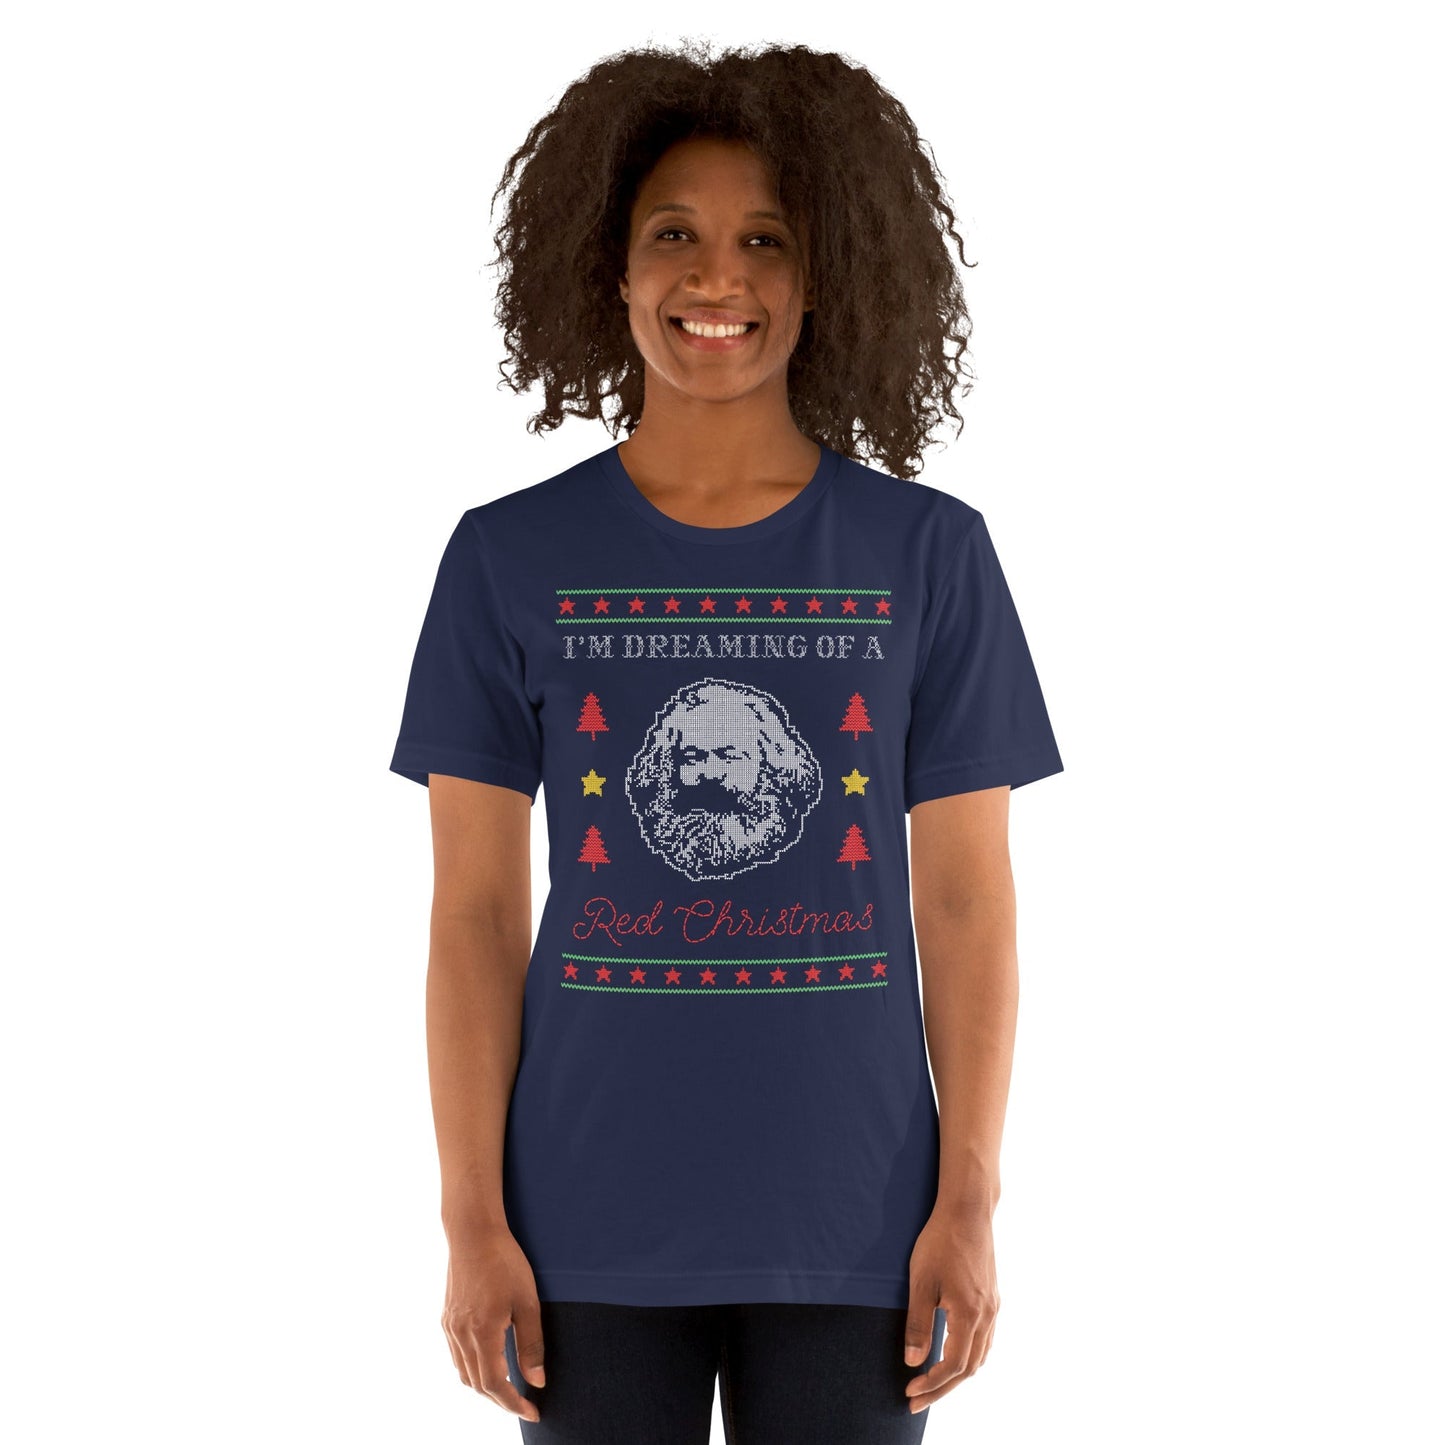 Marx: I’m dreaming of a red Christmas - Basic T-Shirt